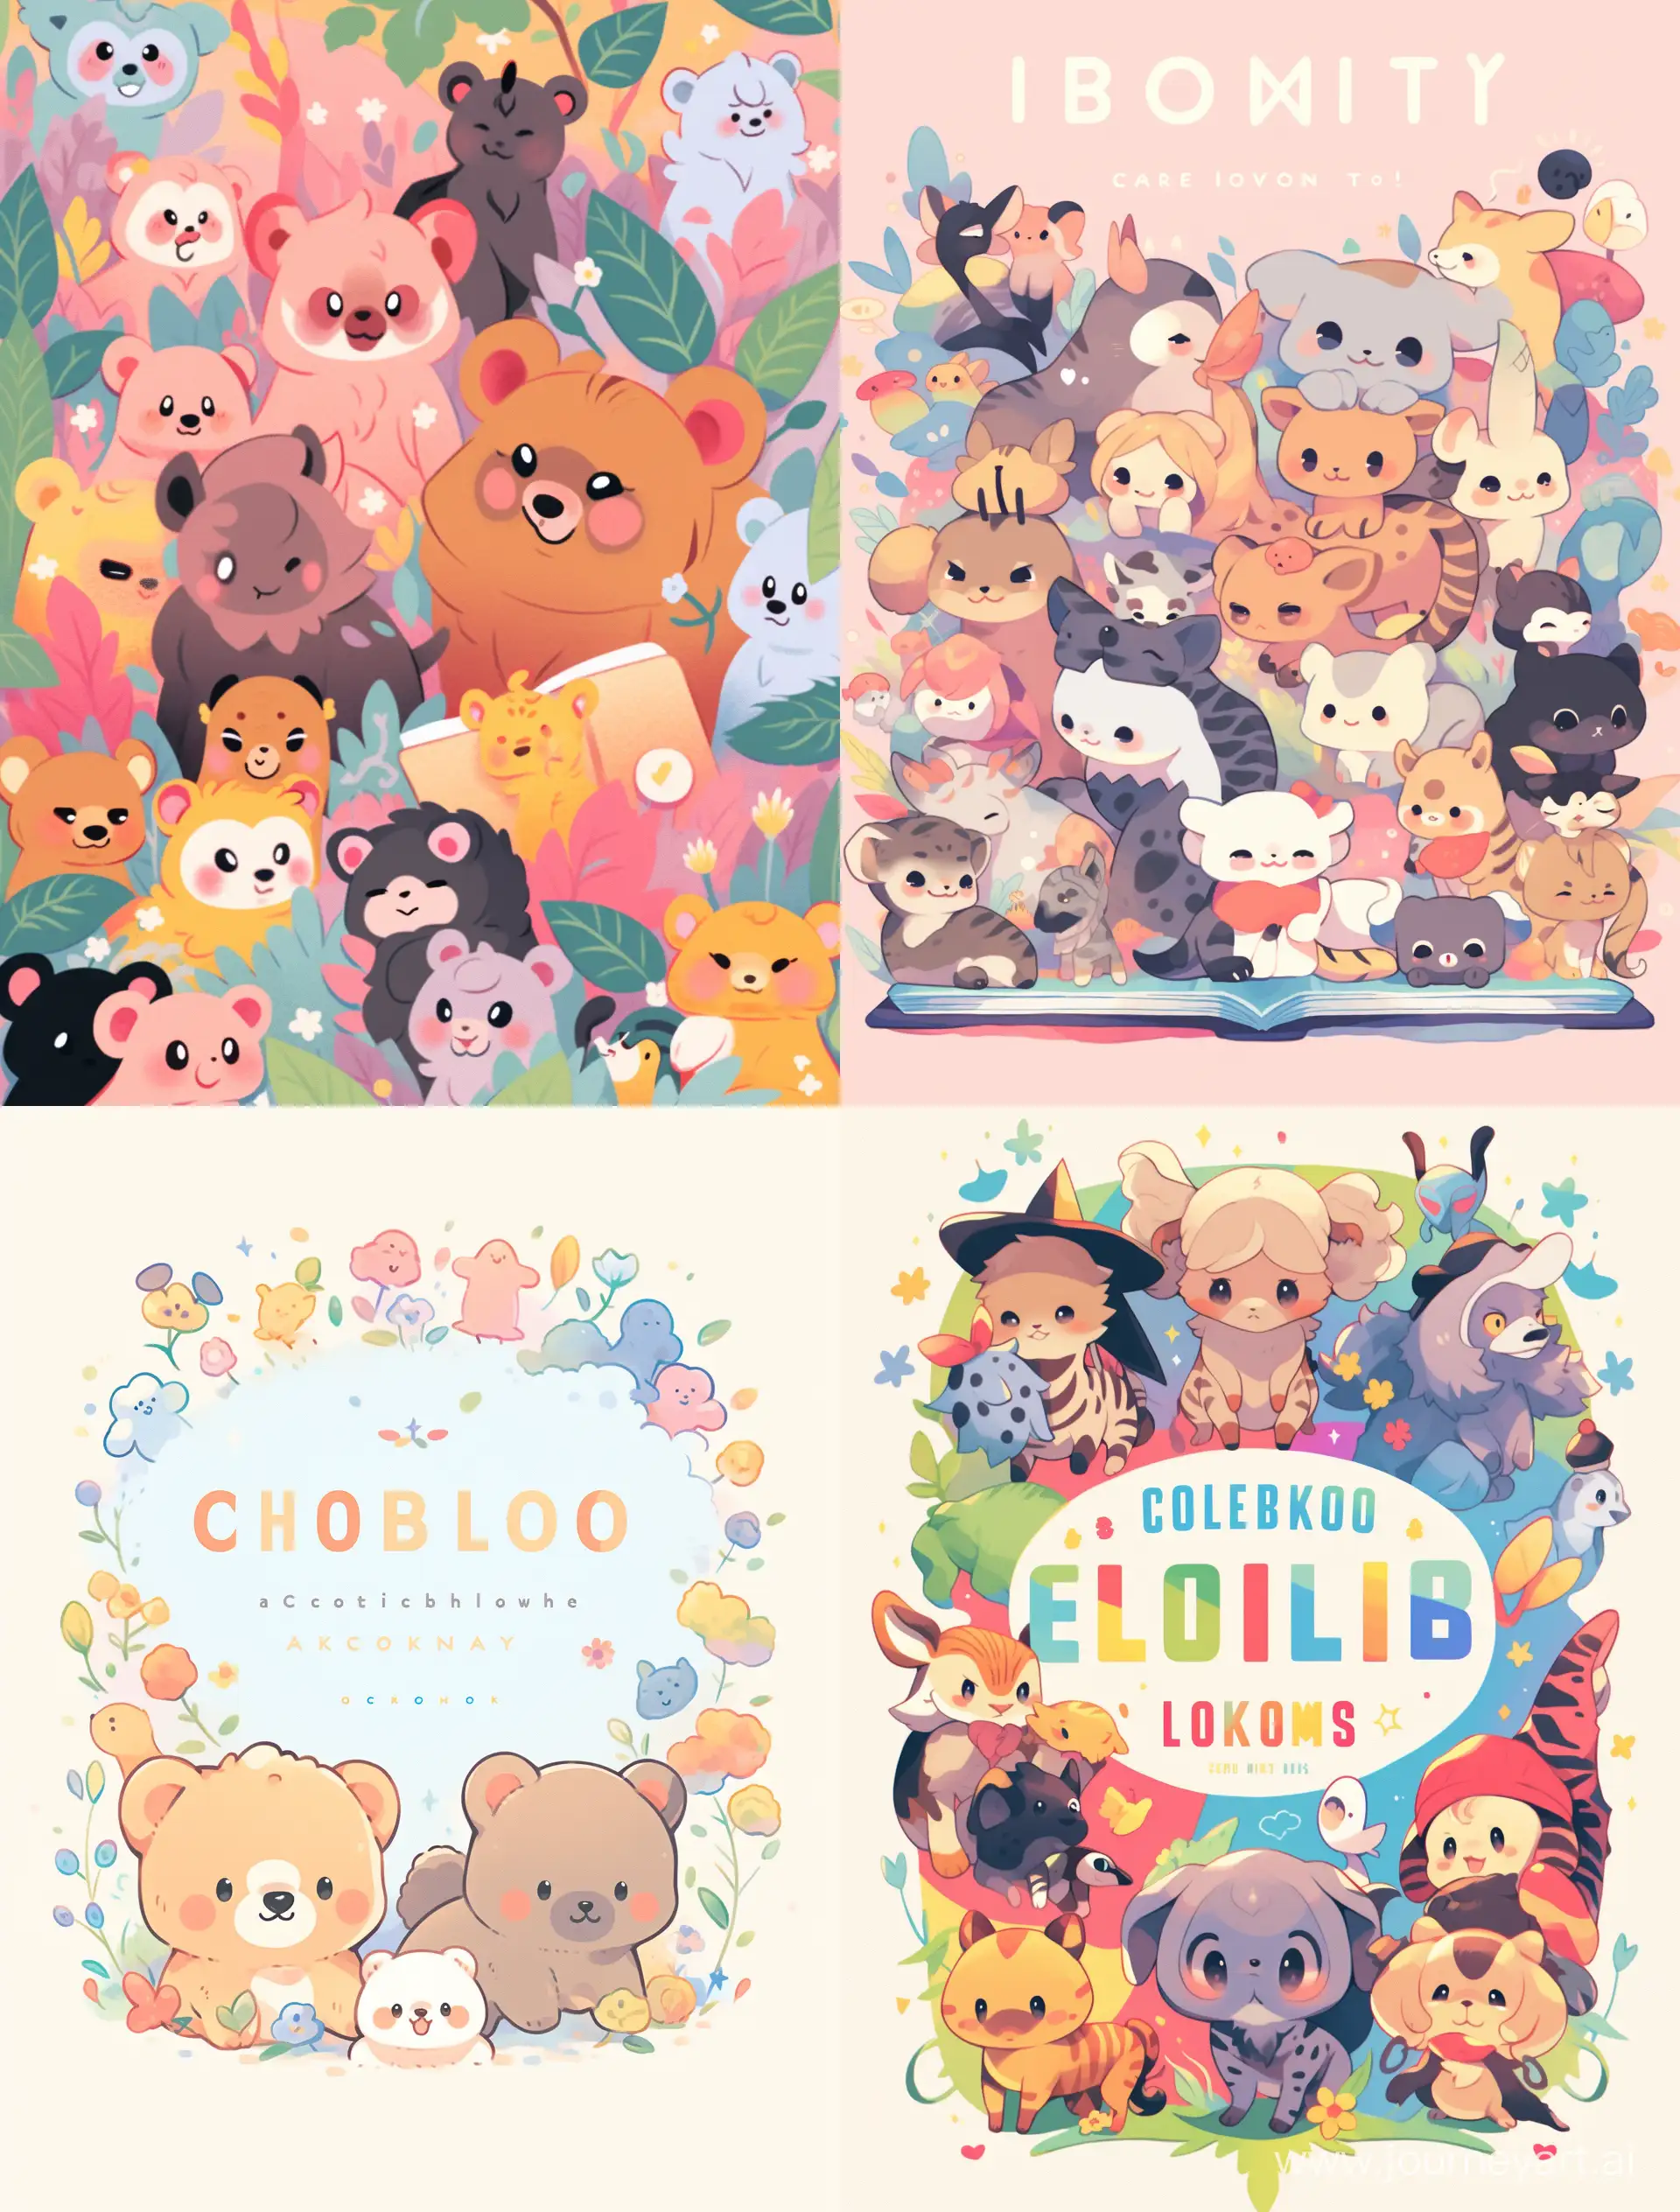 Adorable-Anime-Animals-Colorful-HighQuality-Book-Cover-for-Kids